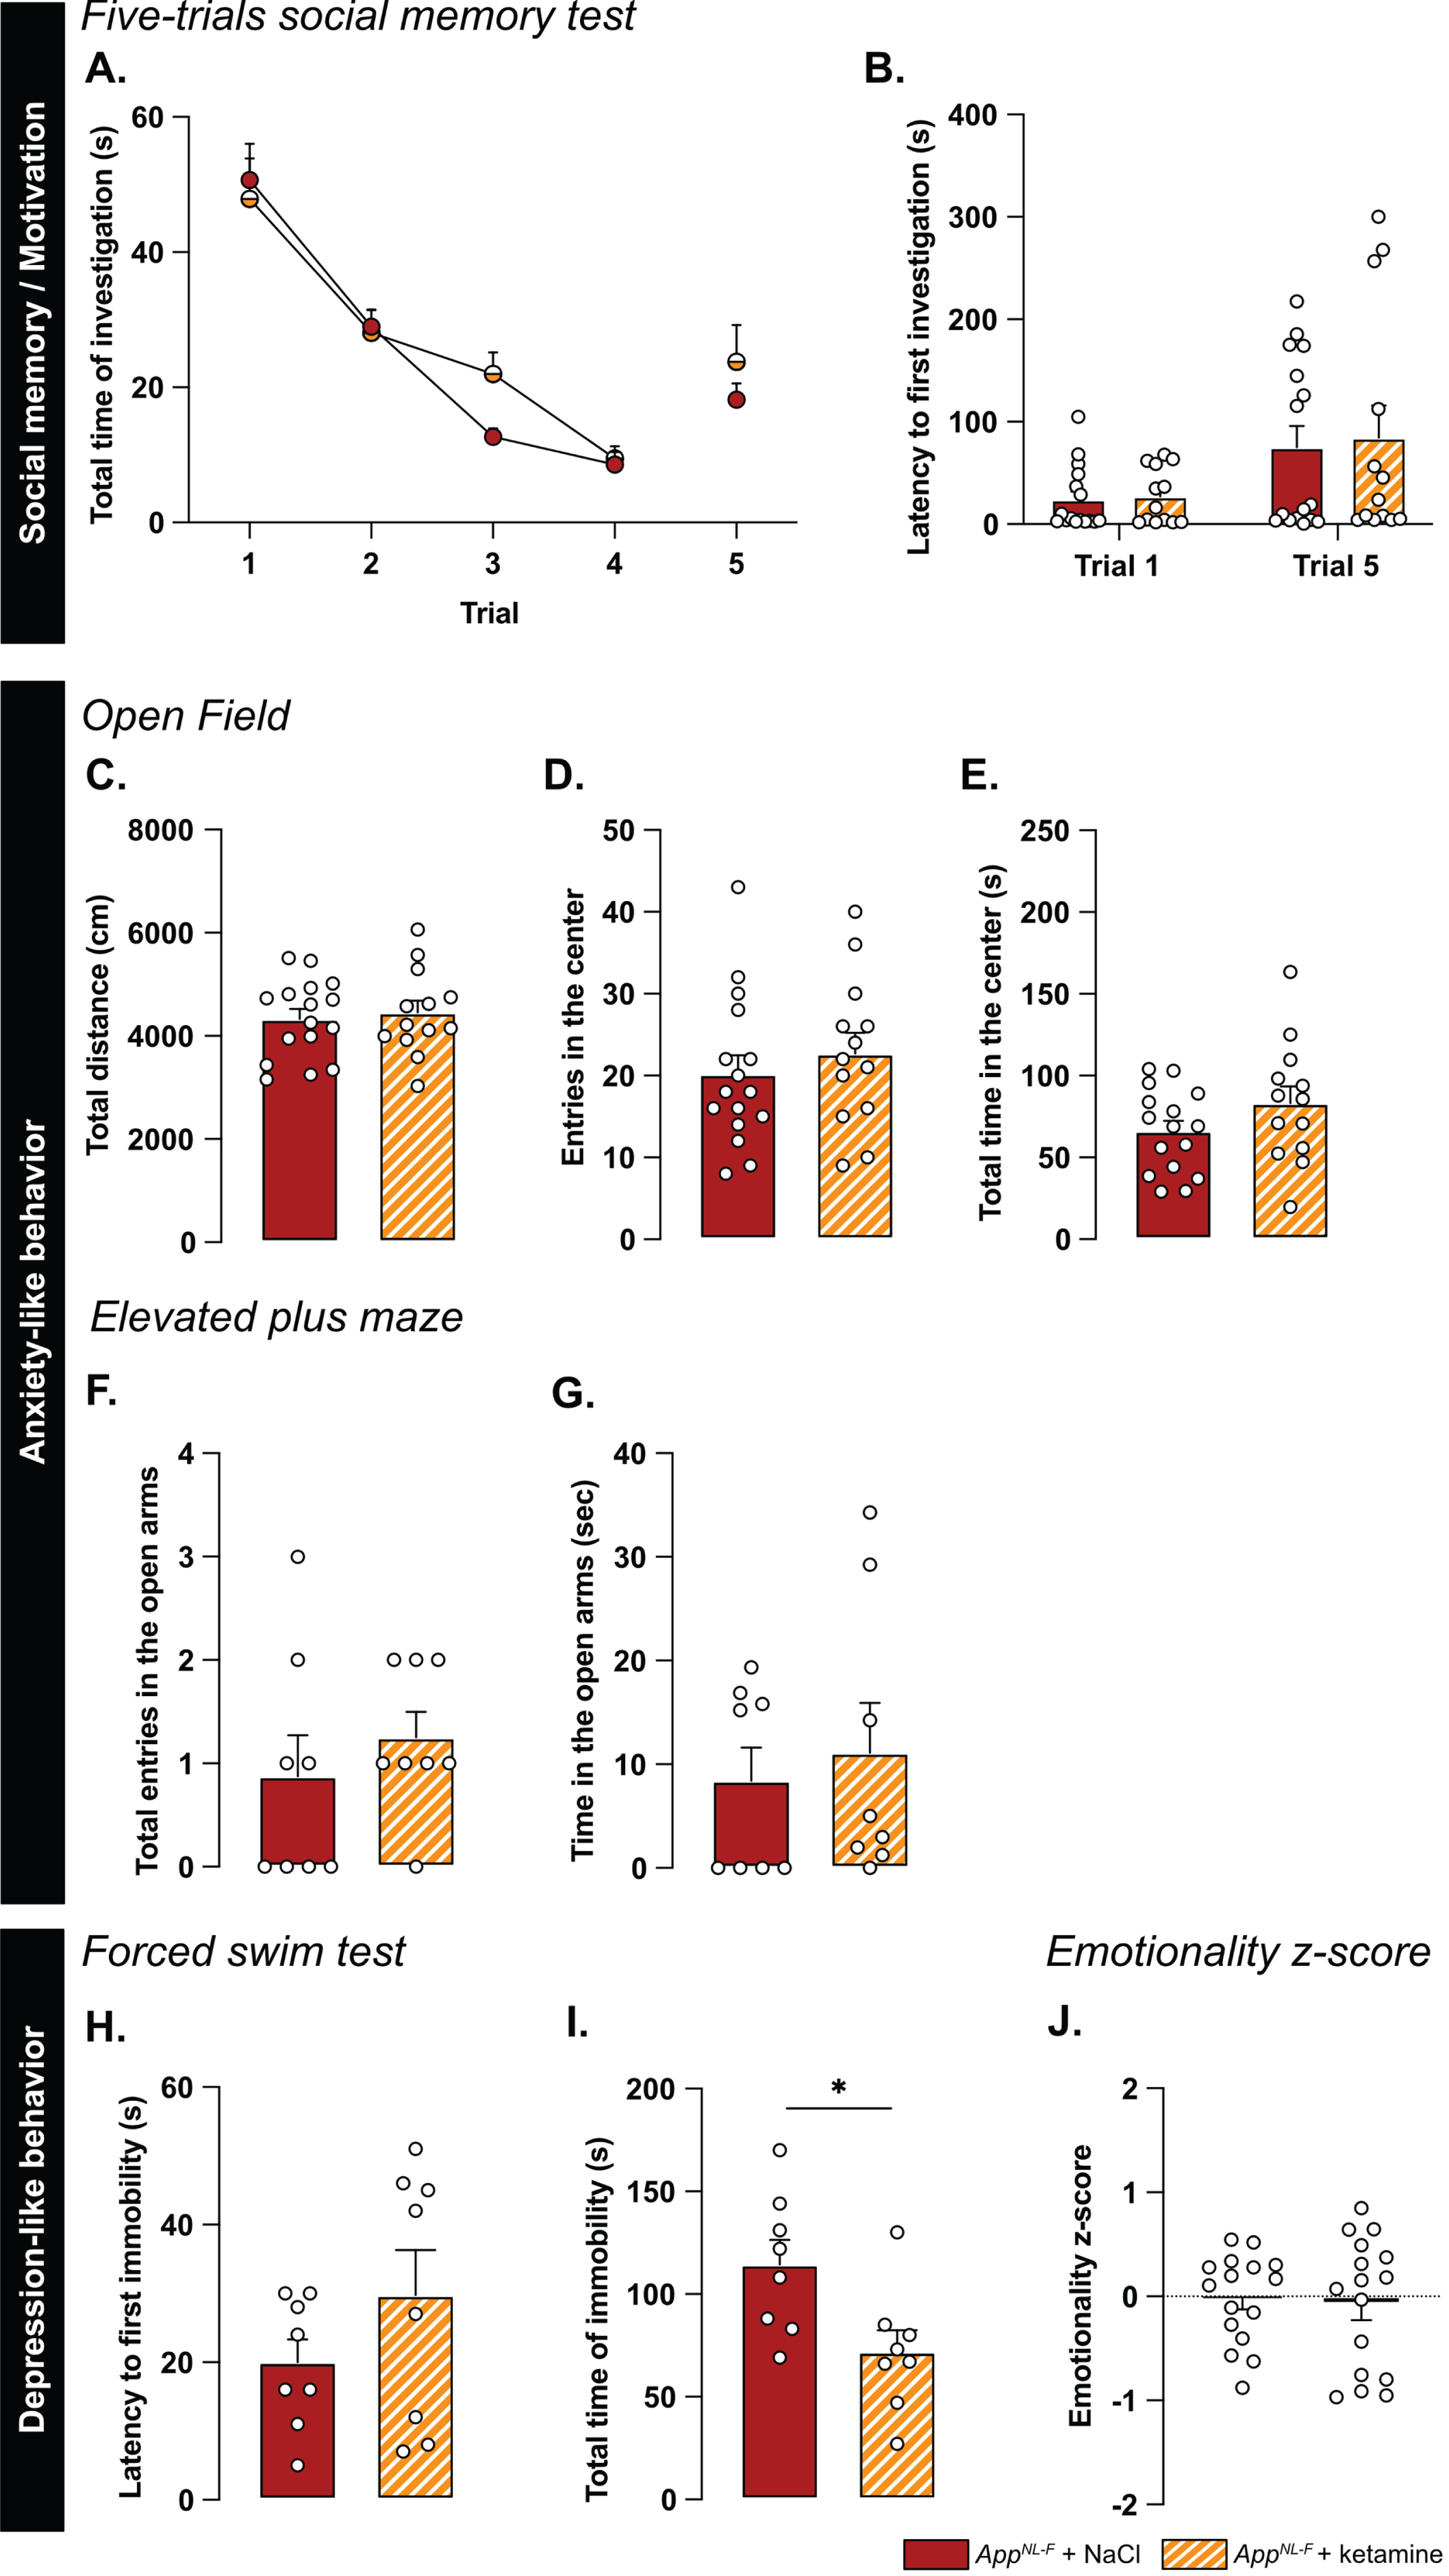 Ketamine (5 mg/kg) partially restores emotionality in 6-month-old AppNL-F mice. As previously shown, AppNL-F mice do not have social memory impairments, as the social interaction progressively declines over four trials. This learning curve is not affected by injections of NaCl of Ketamine 24 h before testing (A). Moreover, ketamine does not significantly affect the lack of motivation (B). AppNL-F + NaCl: n = 16, AppNL-F + ketamine: n = 13. In the open field test, neither the total travelled distance (C), the number of entries in the open area (D) nor the total time in that zone (E) is affected by ketamine. AppNL-F + NaCl: n = 16, AppNL-F + ketamine: n = 13. A similar profile was obtained in the elevated plus maze in which neither the number of entries in the open arms (F) or the total time in that zone (G) are affected. AppNL-F + NaCl: n = 8, AppNL-F + ketamine: n = 8. In the forced swim test, the latency to first immobility (H) is unchanged after ketamine treatment while the total time of immobility (I) is reduced. Student t-test: *p < 0.05 statistically different as shown. AppNL-F + NaCl: n = 8, AppNL-F + ketamine: n = 8. Interestingly, the emotionality z-score (J) remains unchanged after ketamine 5 mg/kg treatment. AppNL-F + NaCl (left); n = 16, AppNL-F + ketamine (right); n = 16.